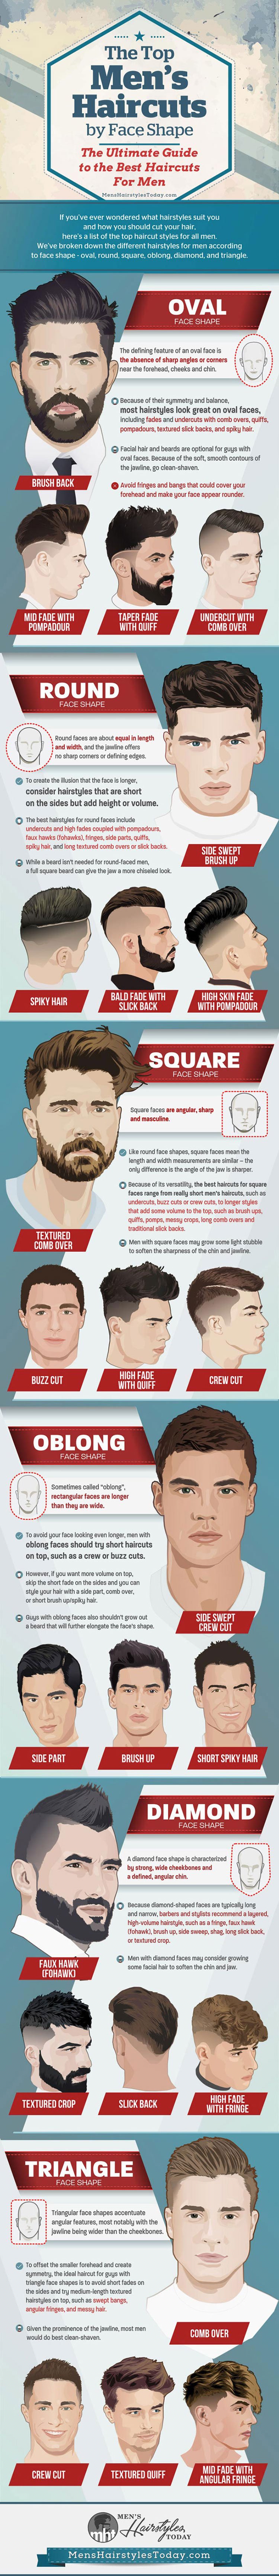 MHT Infographic - Haircuts By Face Shape